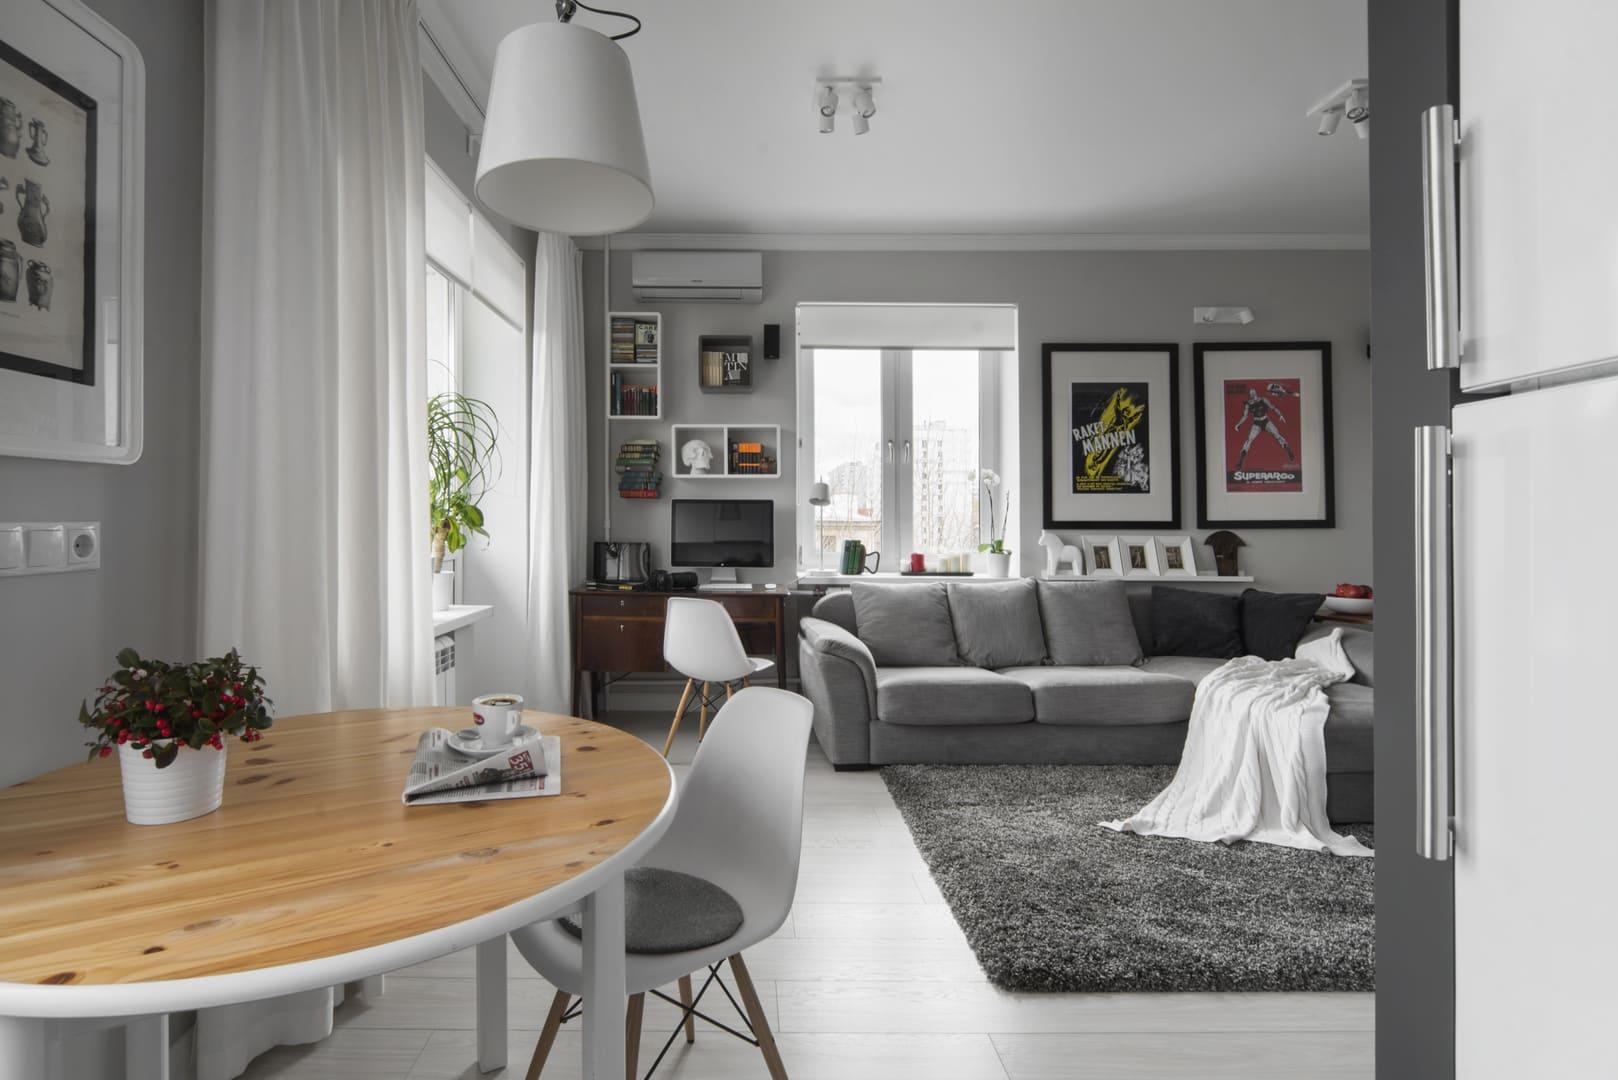 This 297 sq. ft. Apartment Showcases the Flexibility of Compact Design